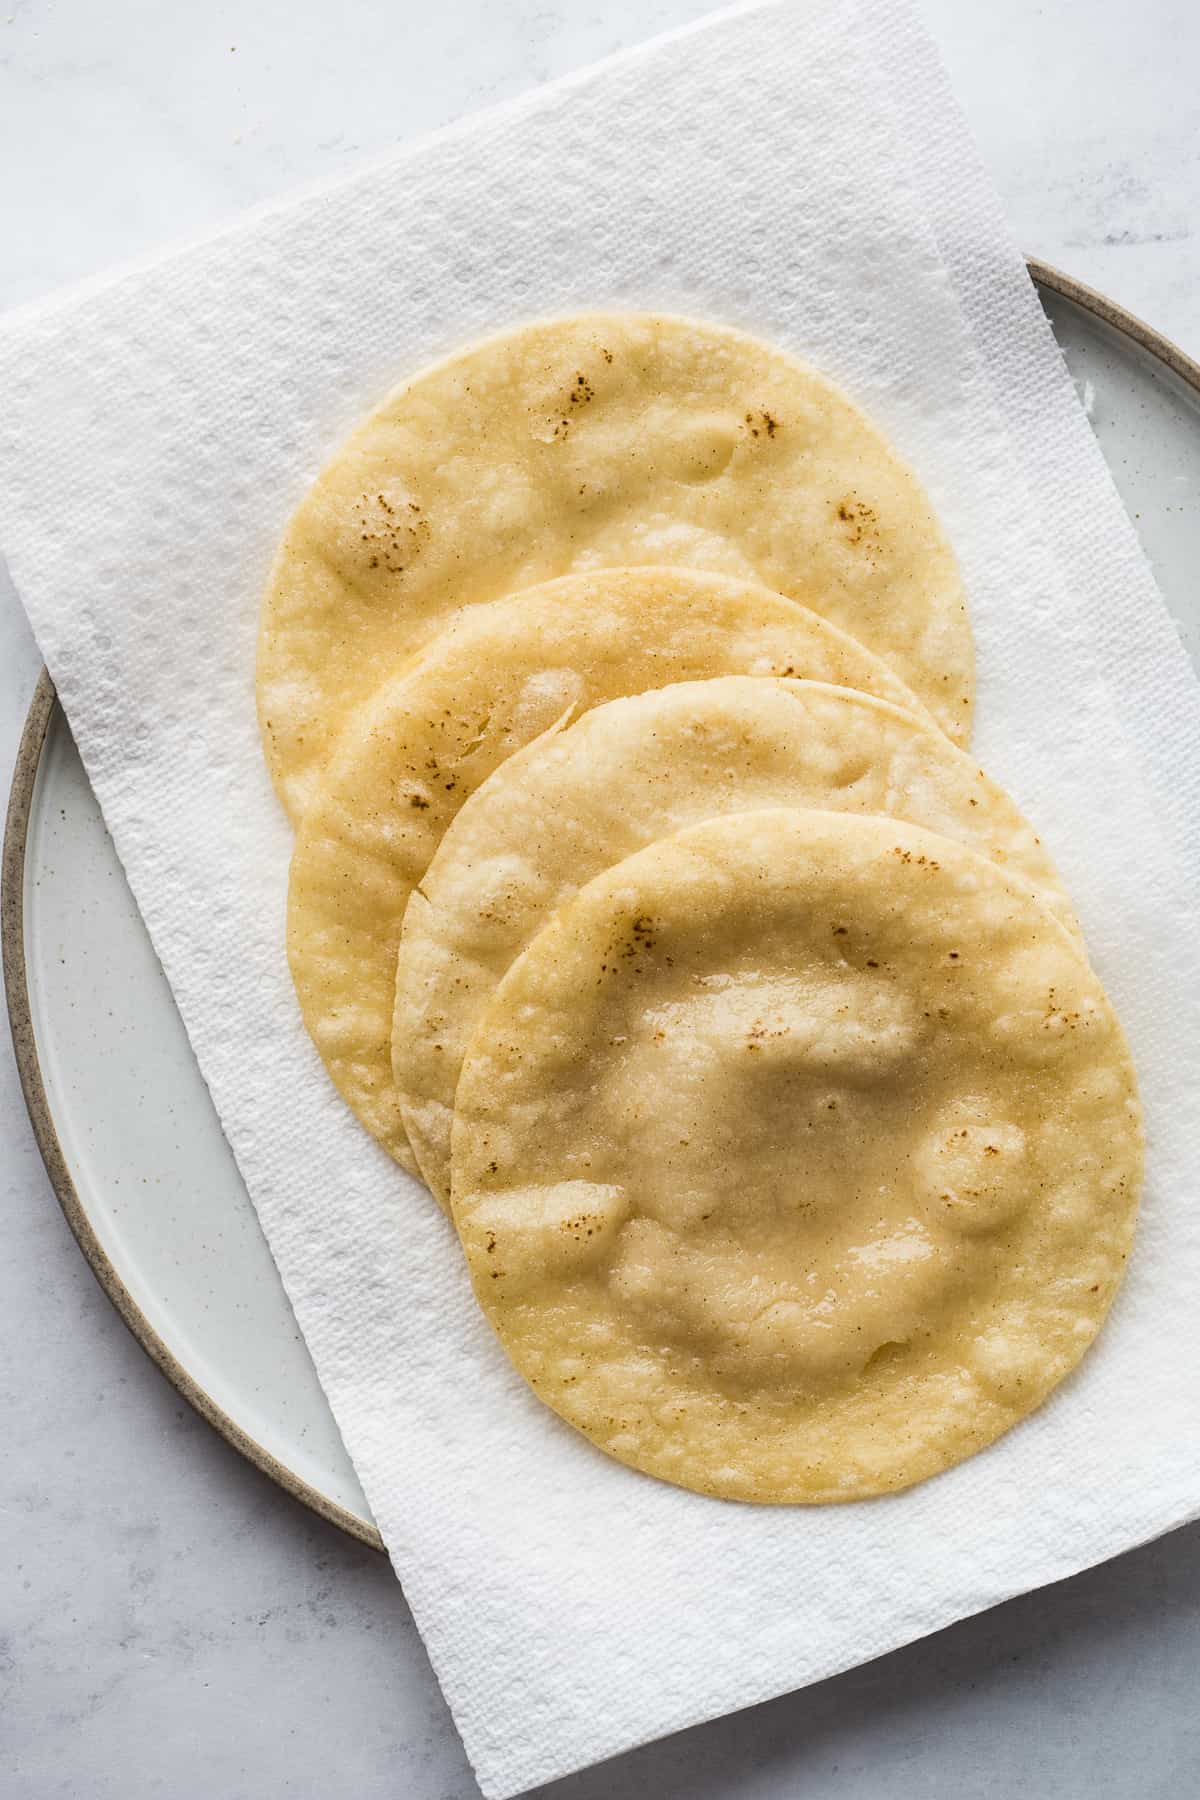 Lightly fried corn tortillas resting on a plate lined with paper towels.